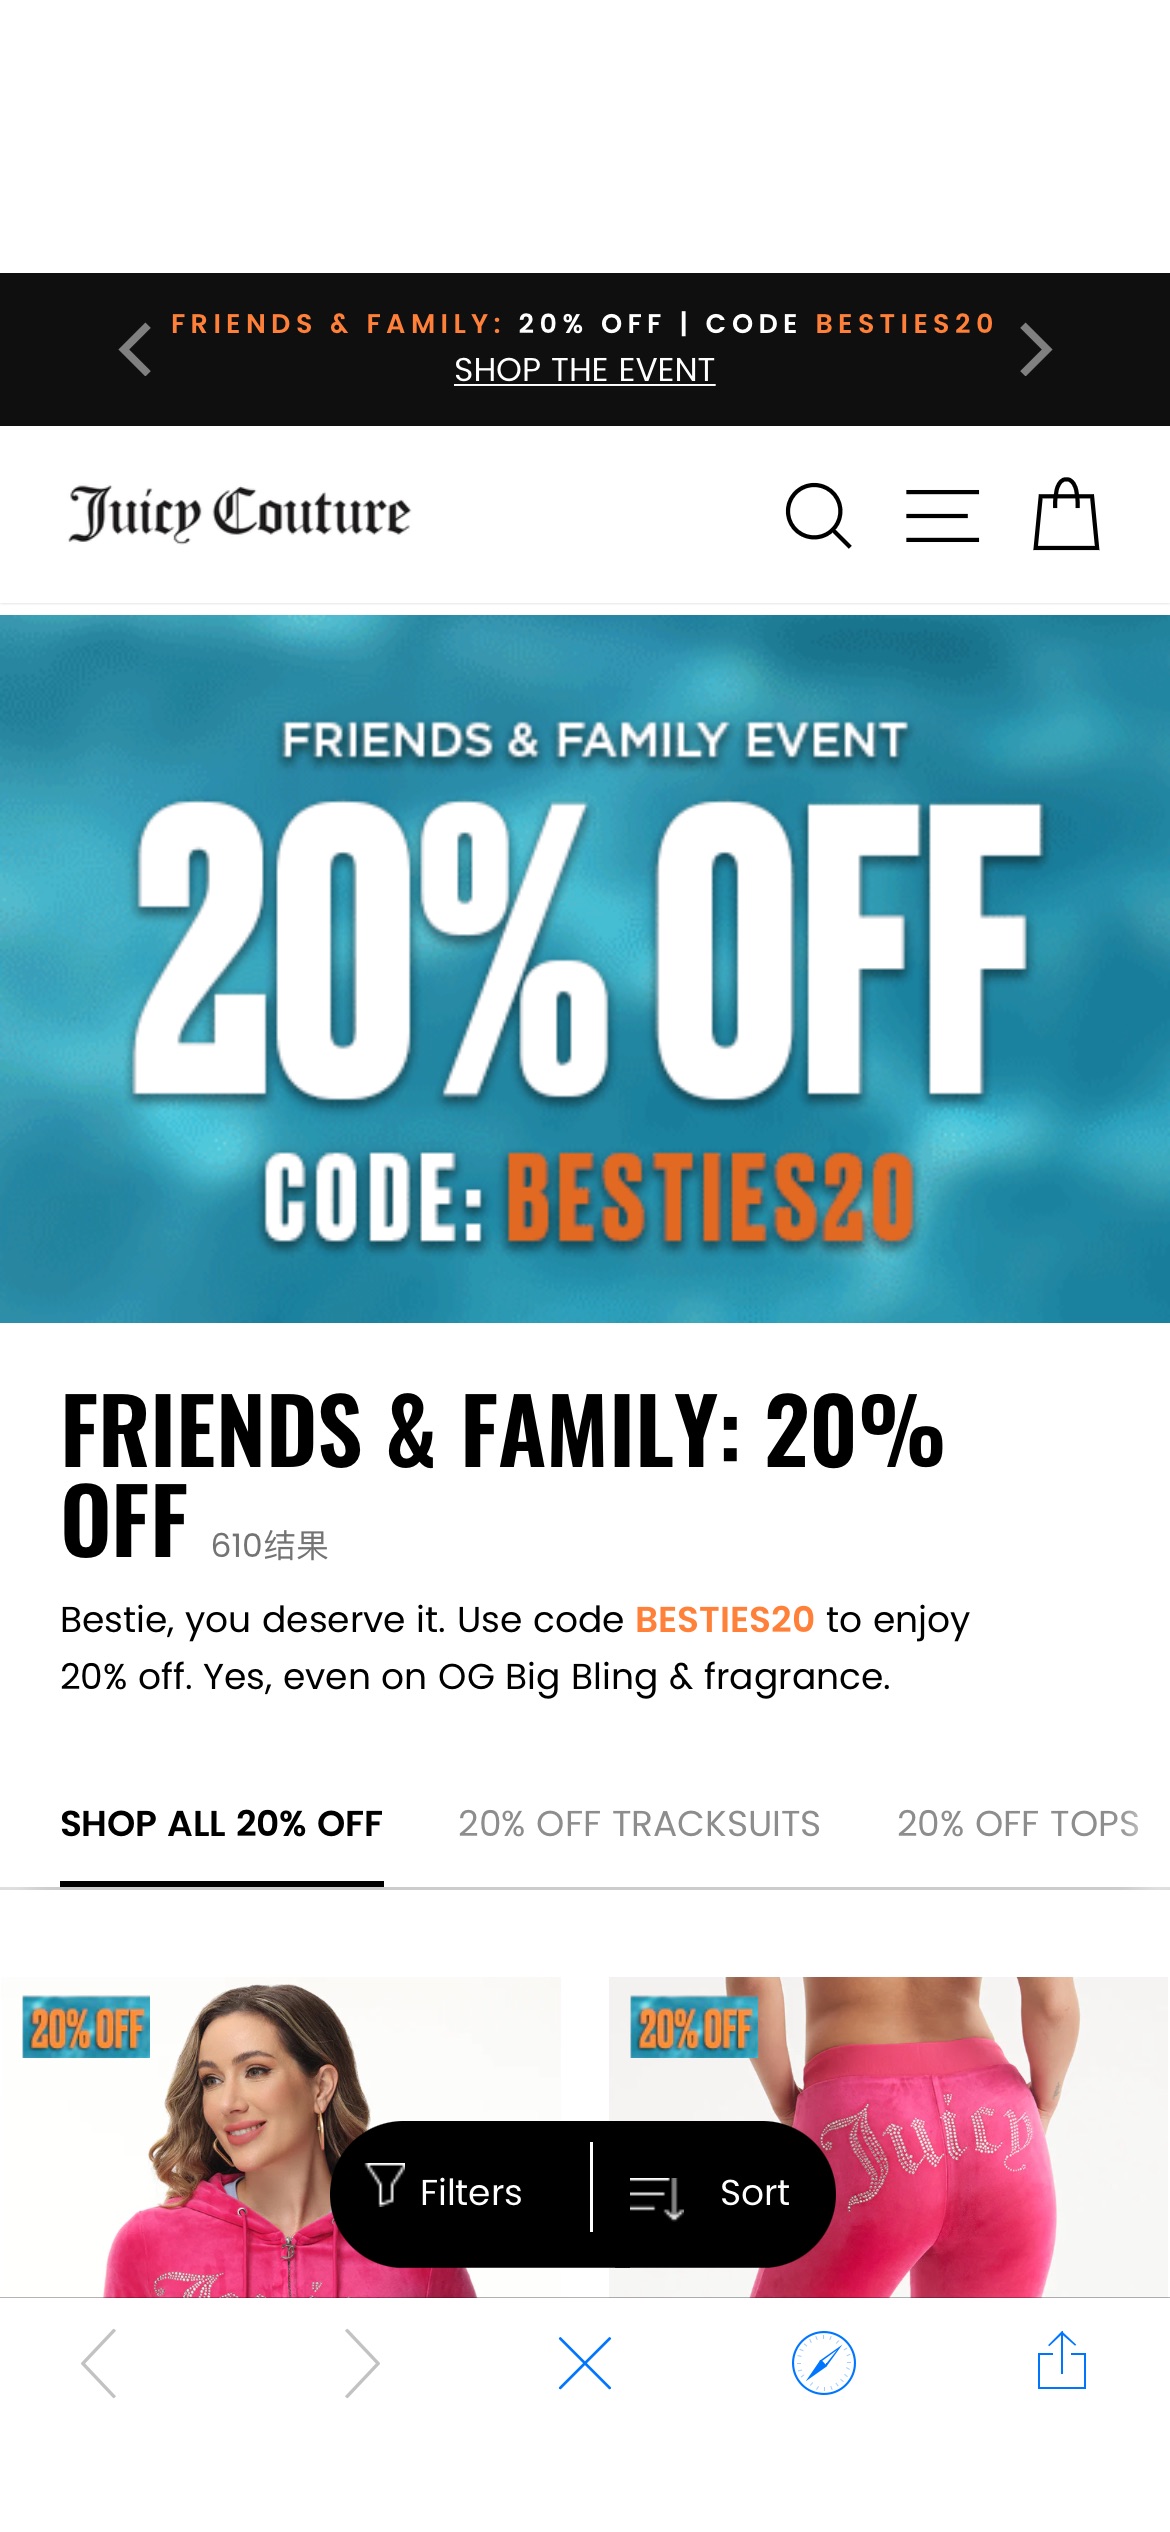 FRIENDS & FAMILY: 20% OFF